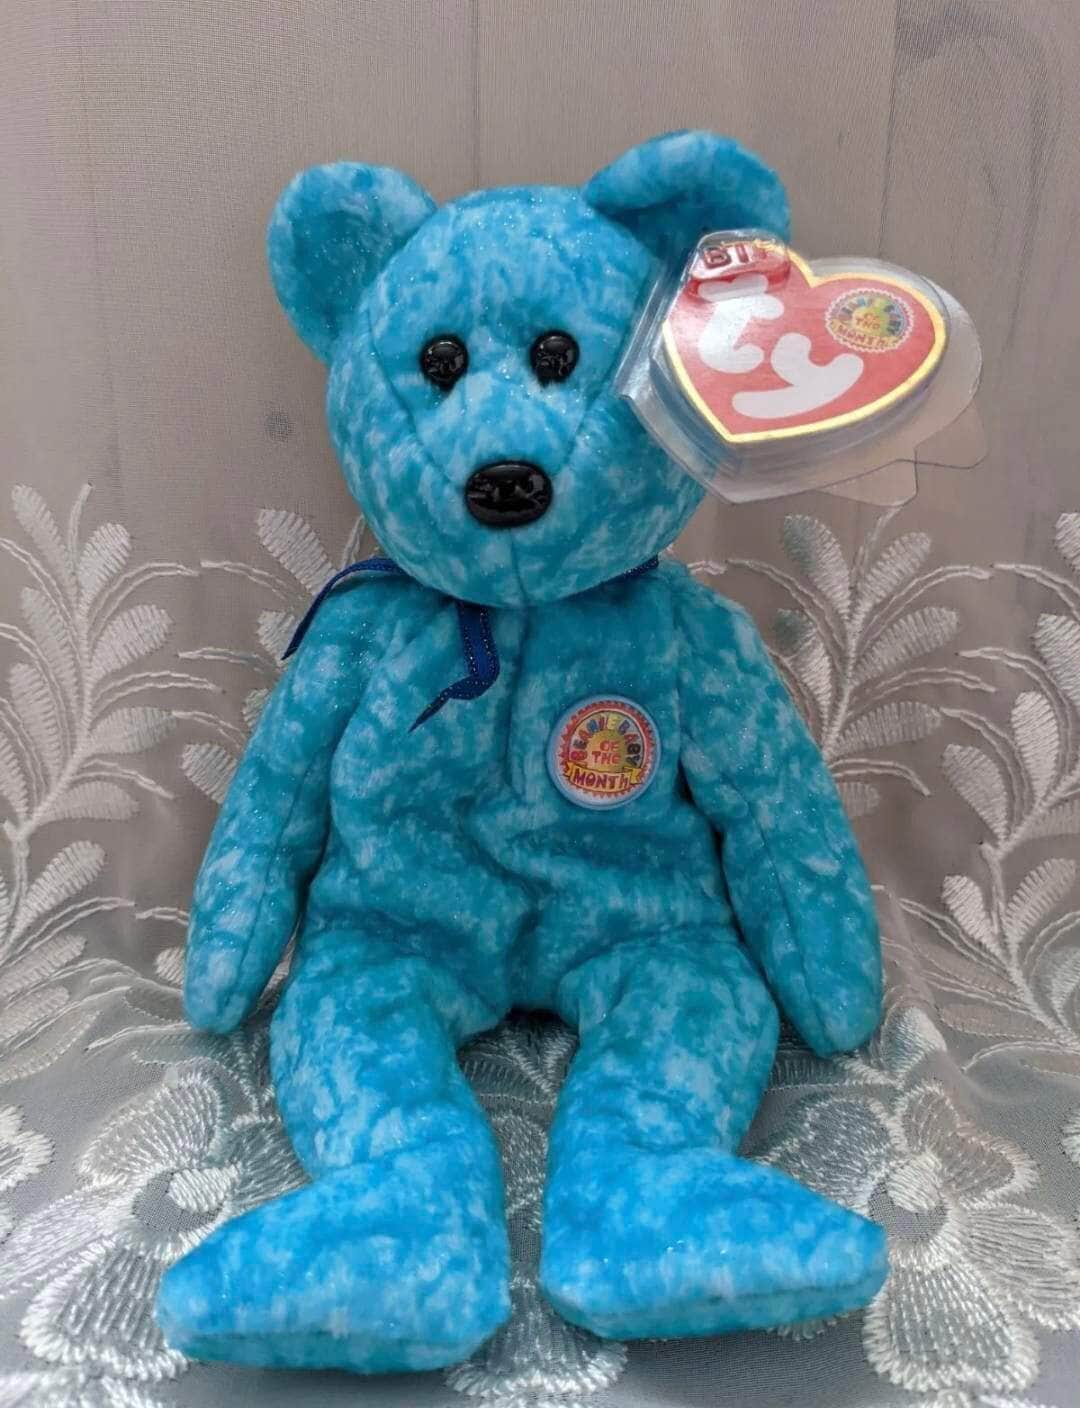 Ty Beanie Baby Of The Month - Sparkles The Blue Bear - January 2003 (8.5in) - Vintage Beanies Canada